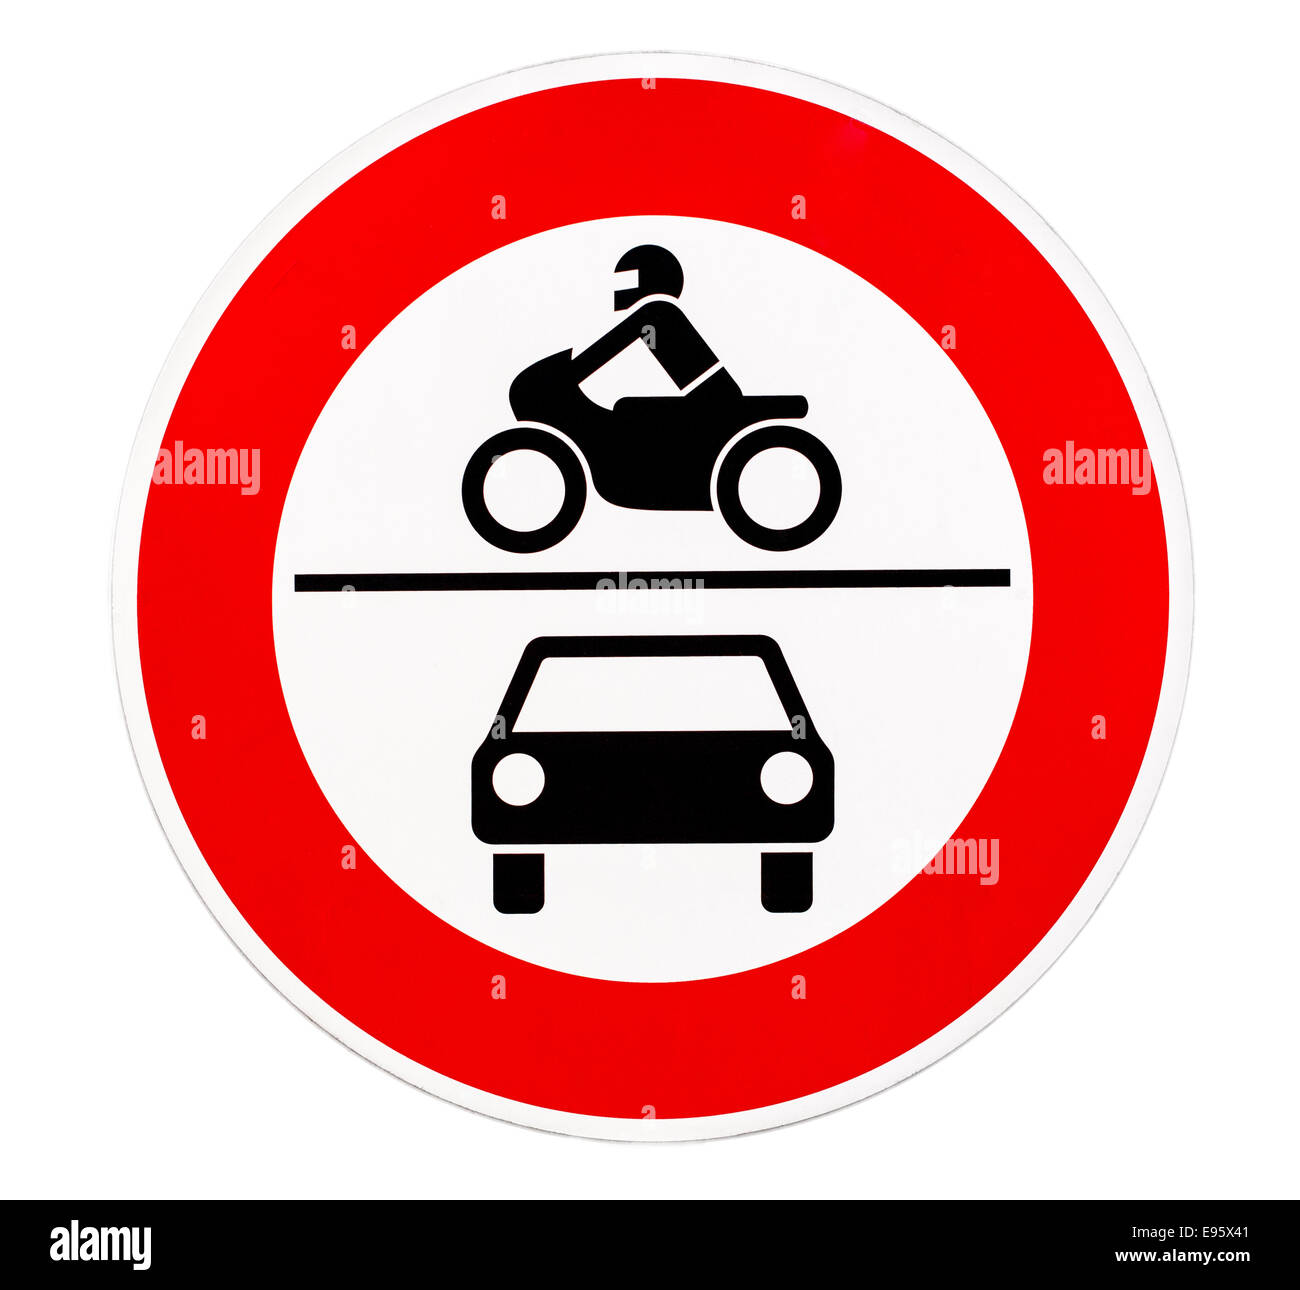 No access for motor vehicles traffic sign against white background Stock Photo